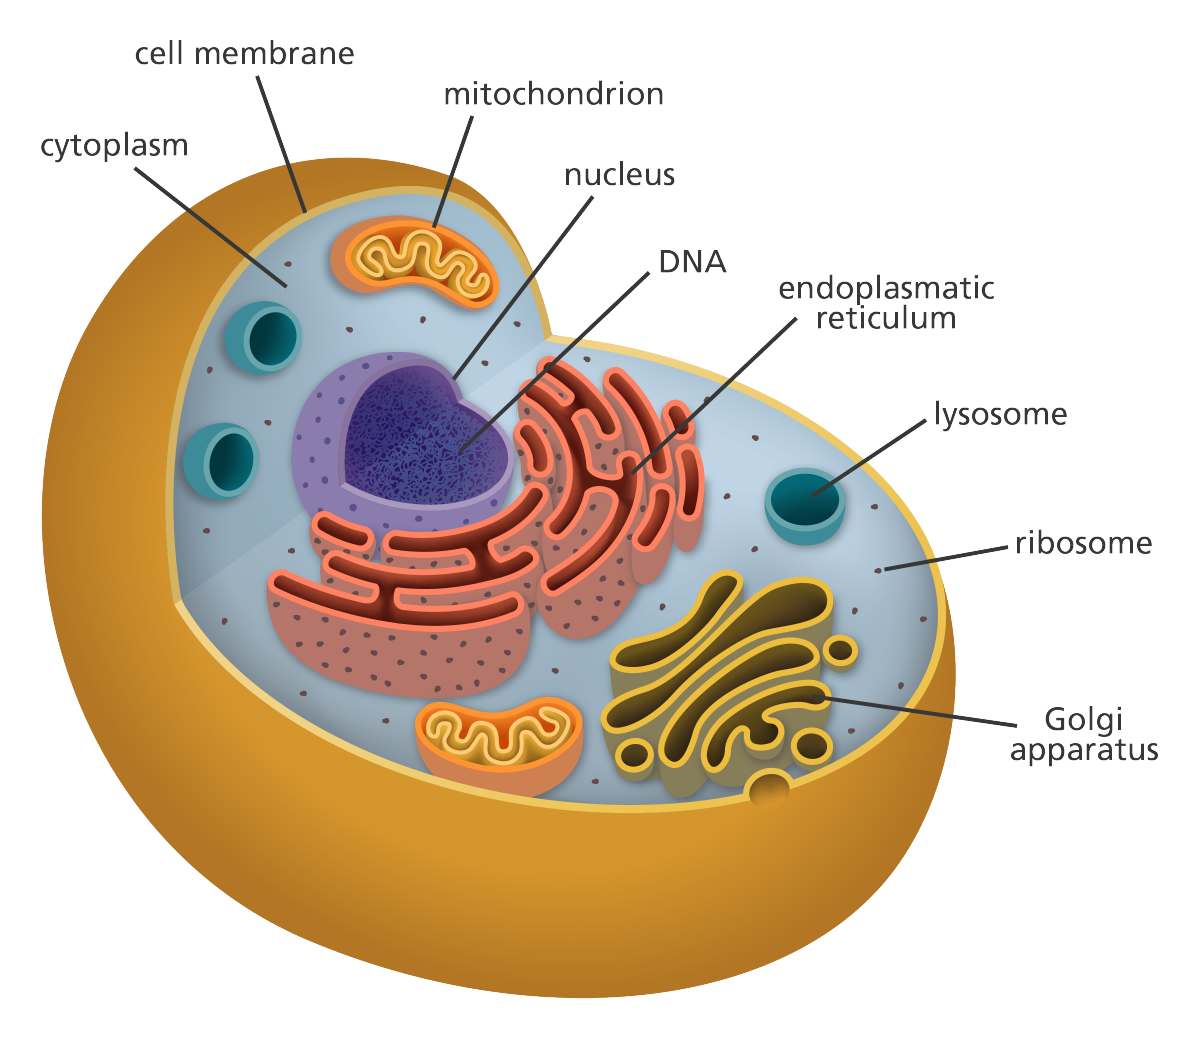 case study questions class 8 science cell structure and function